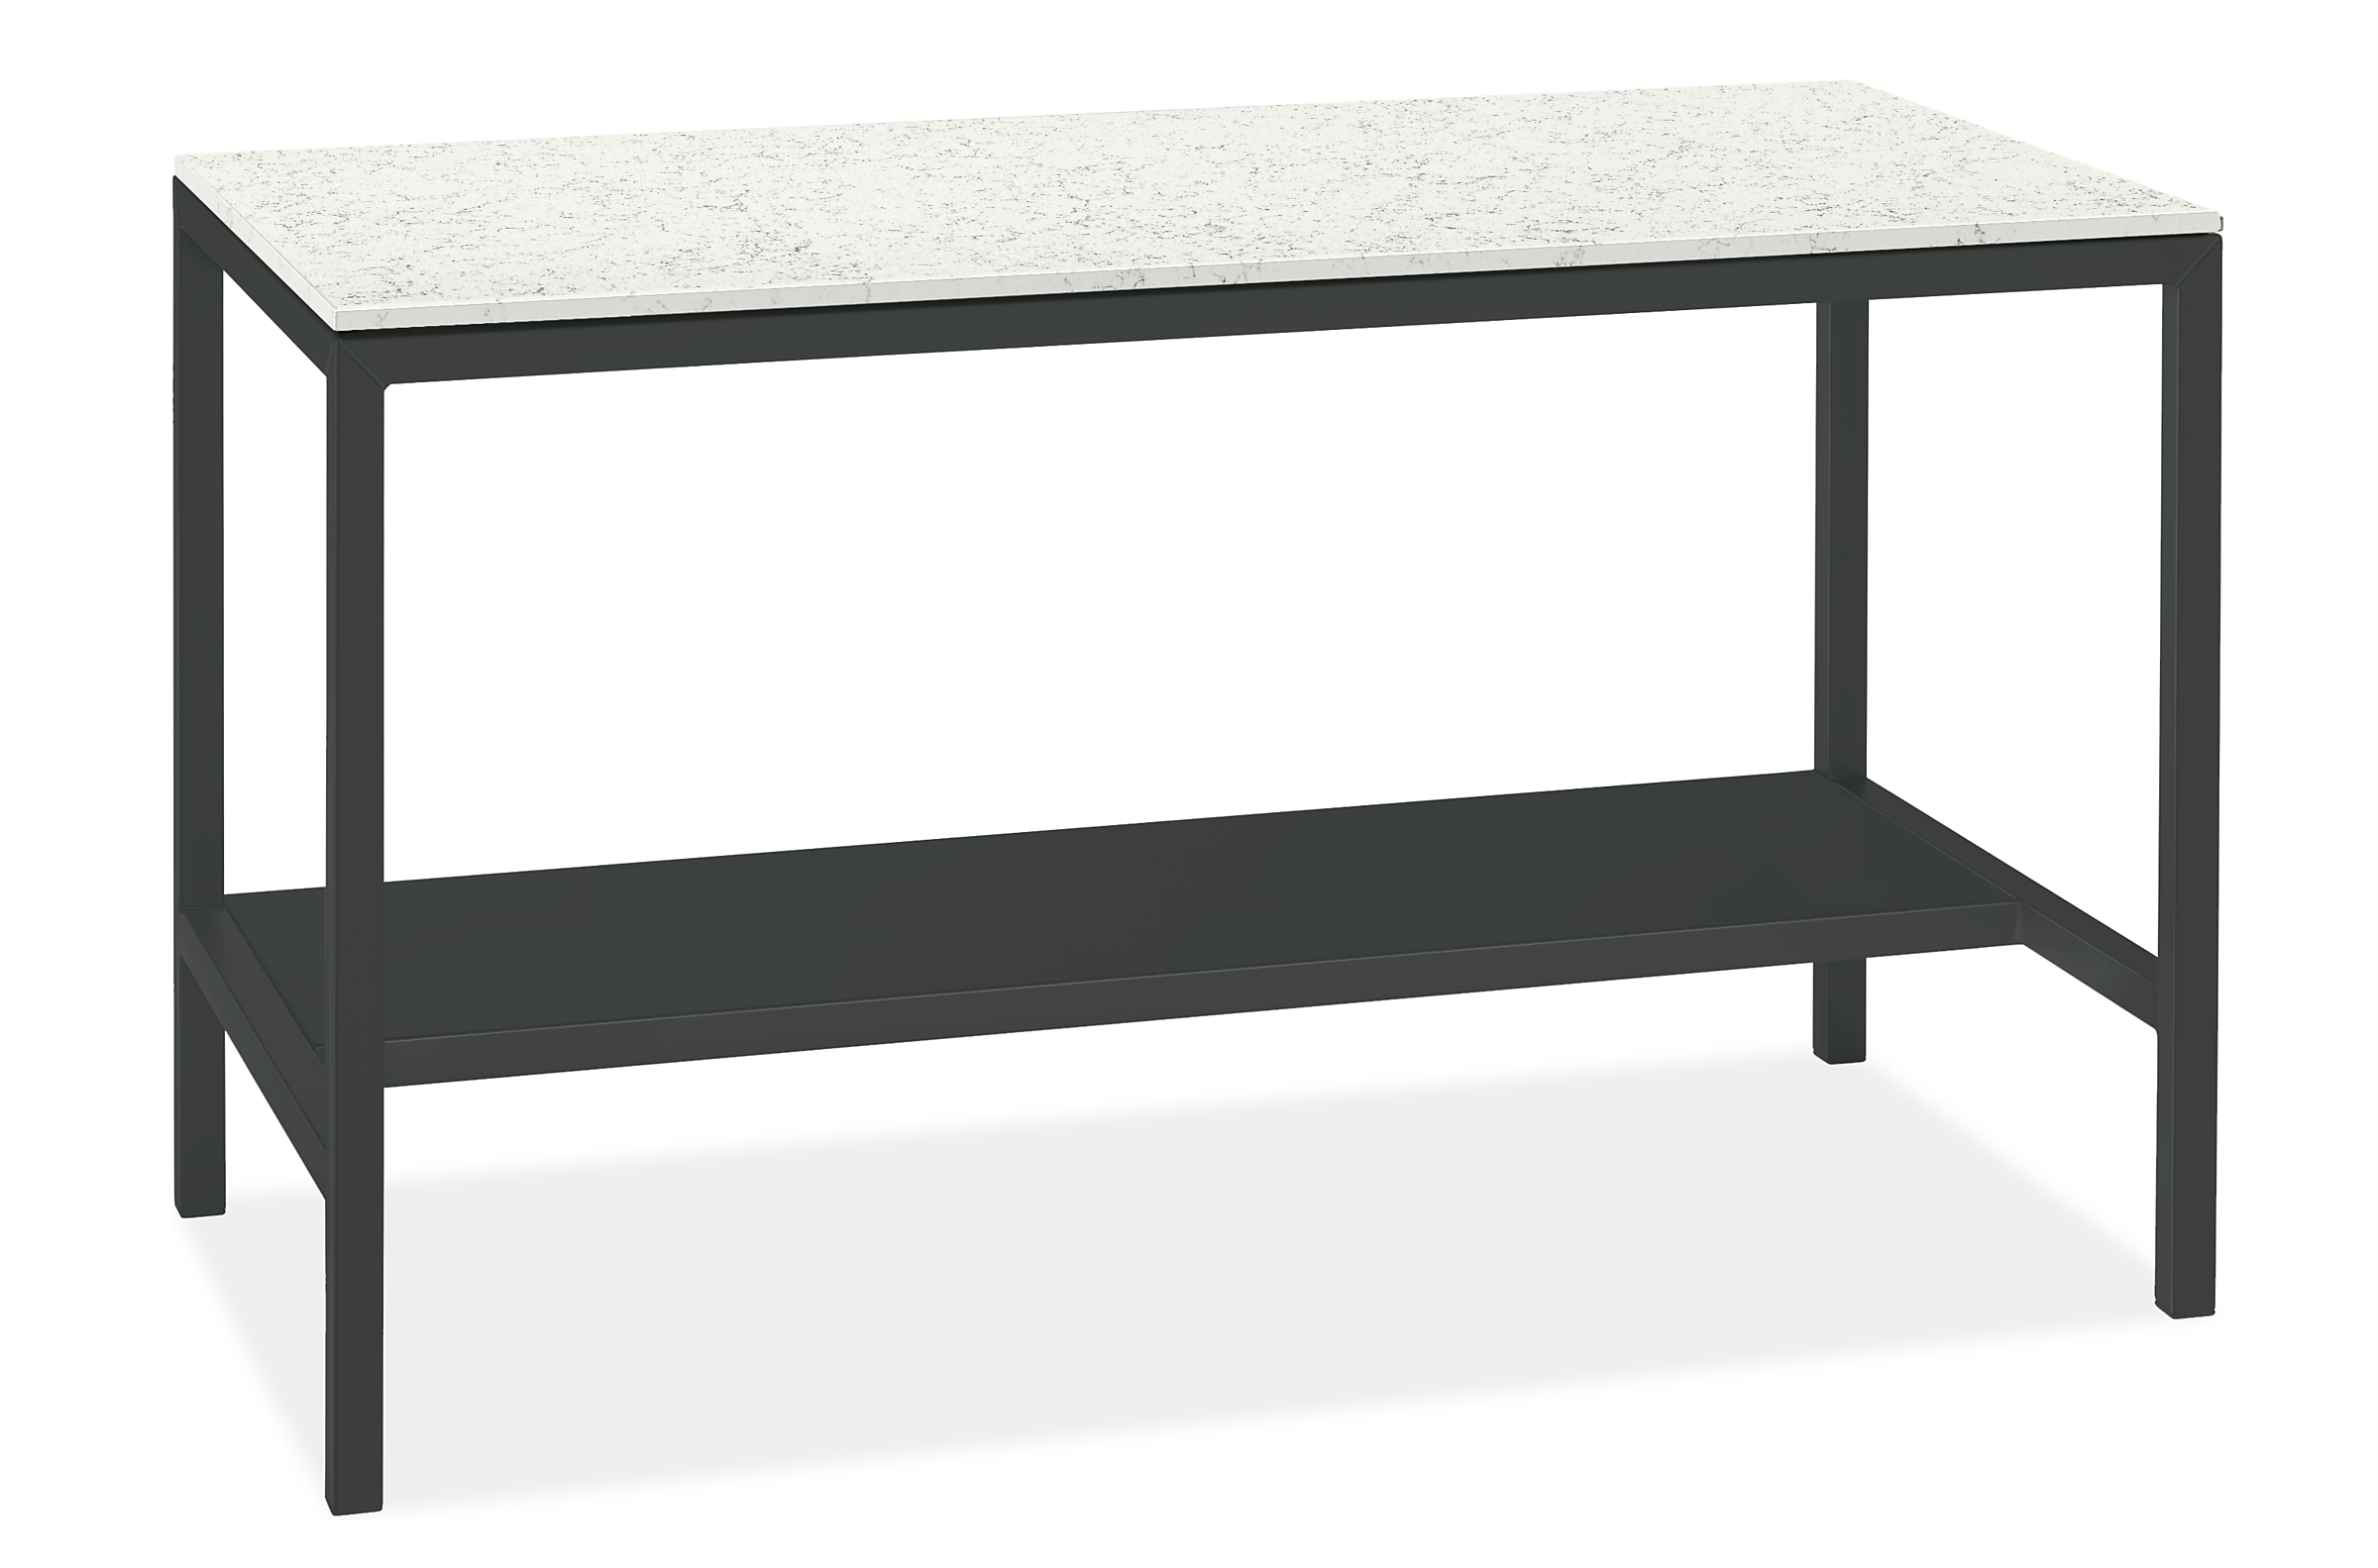 Parsons 60w 30d 35h Outdoor Narrow Shelf Counter Table with 1.5" Leg